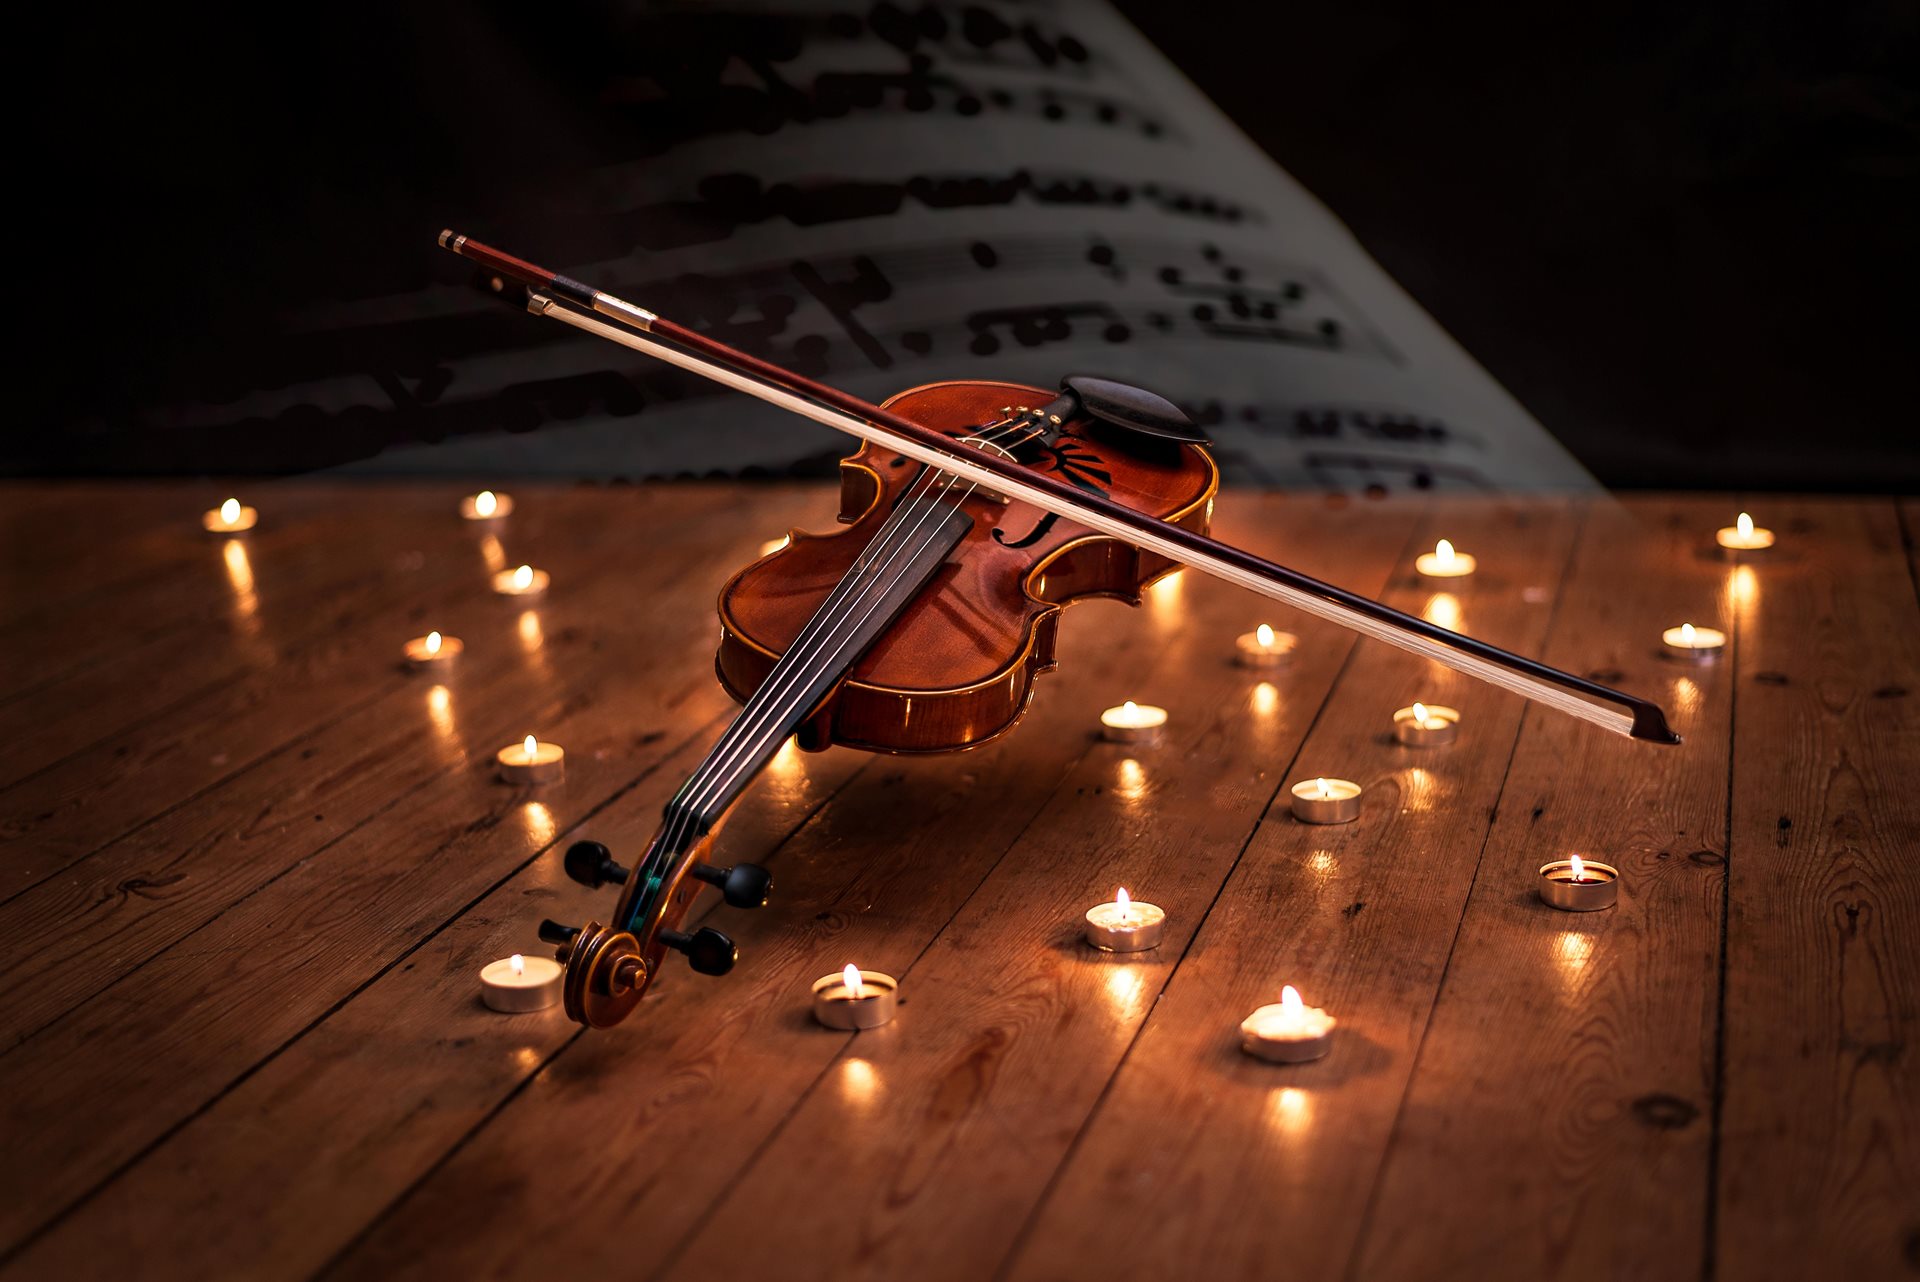 Violin surrounded by tea lights